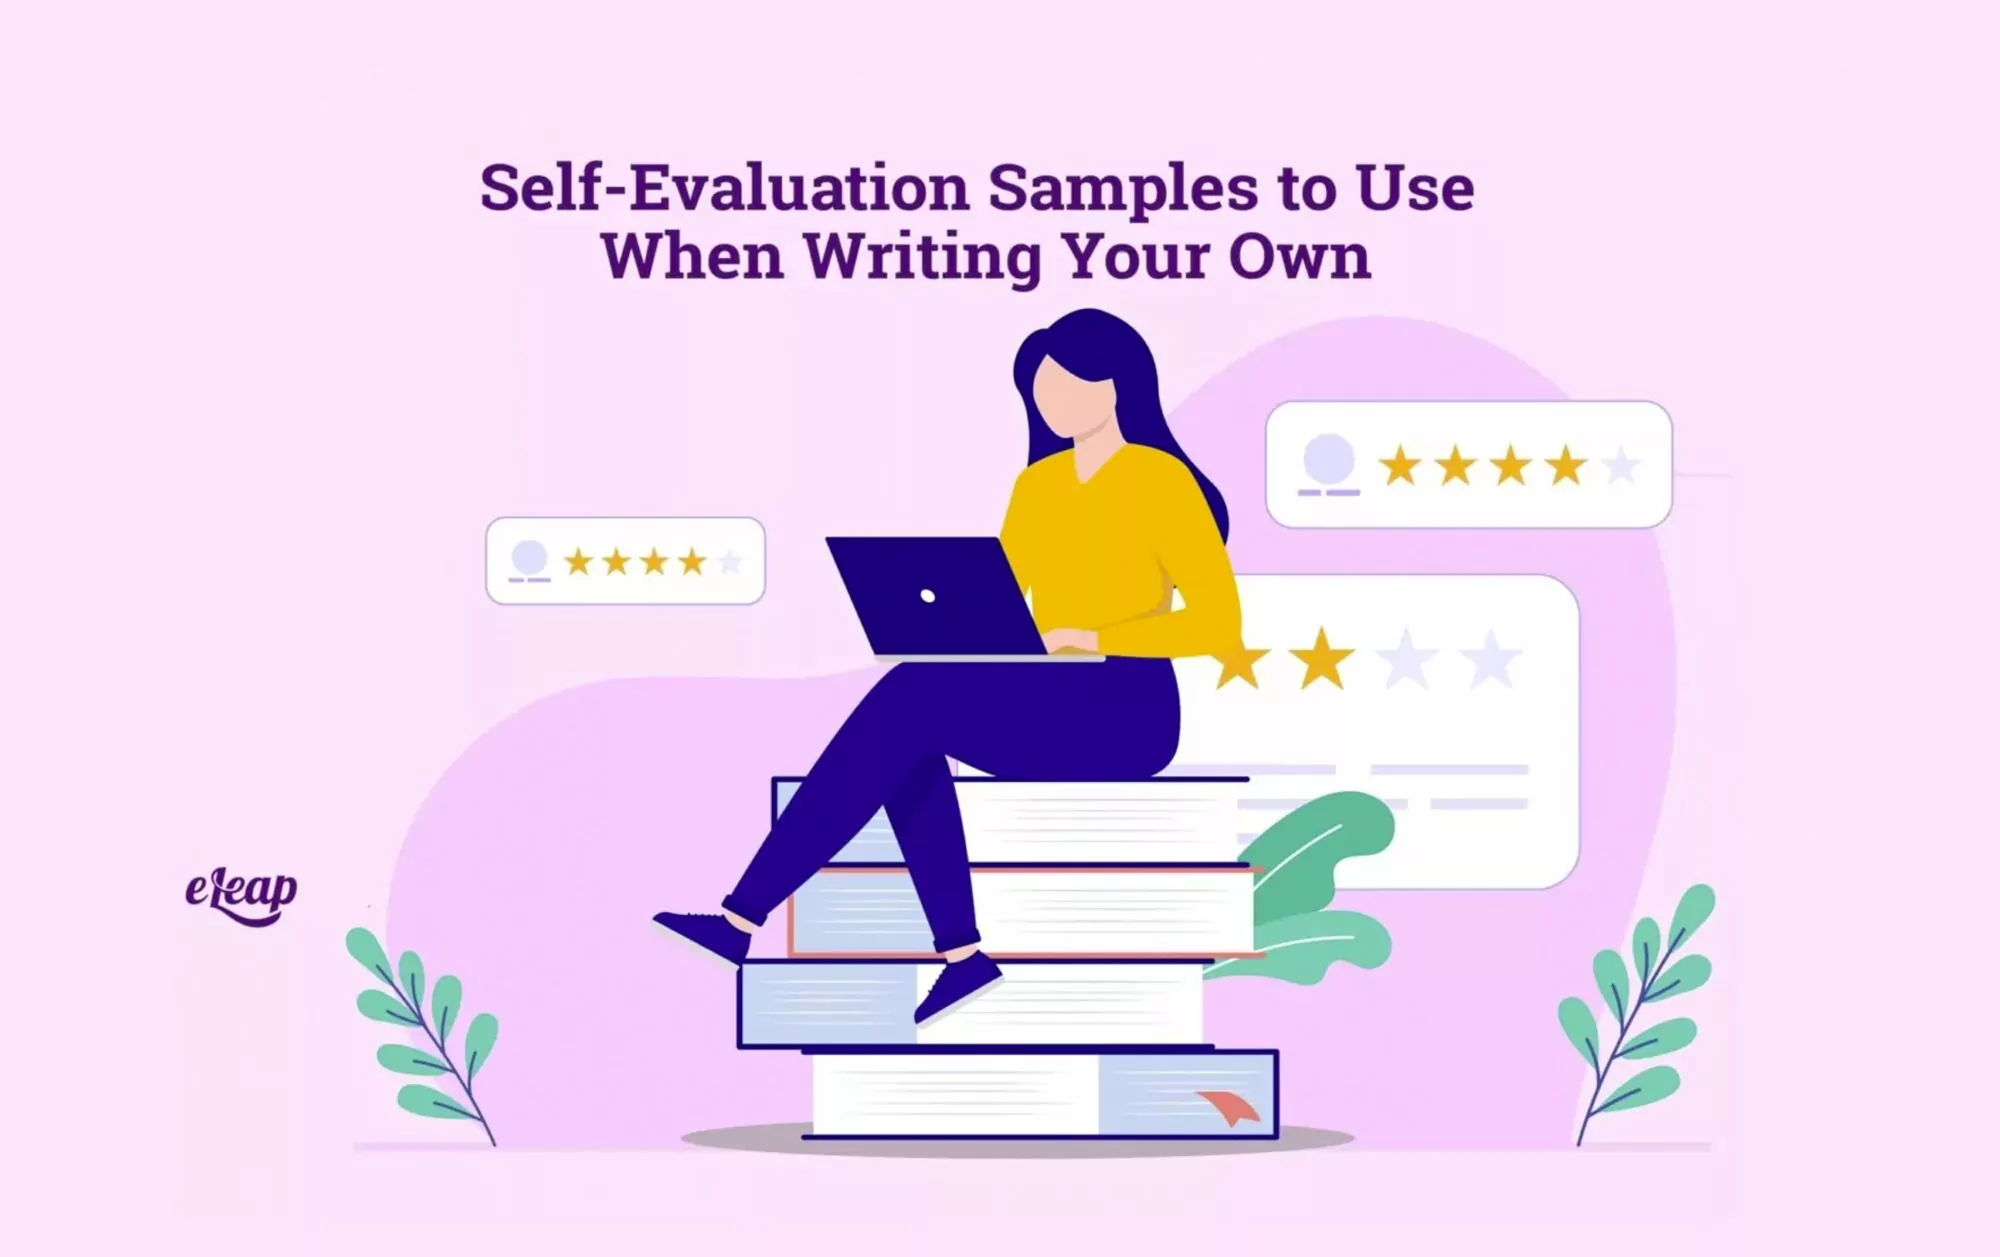 Self-Evaluation Samples to Use When Writing Your Own